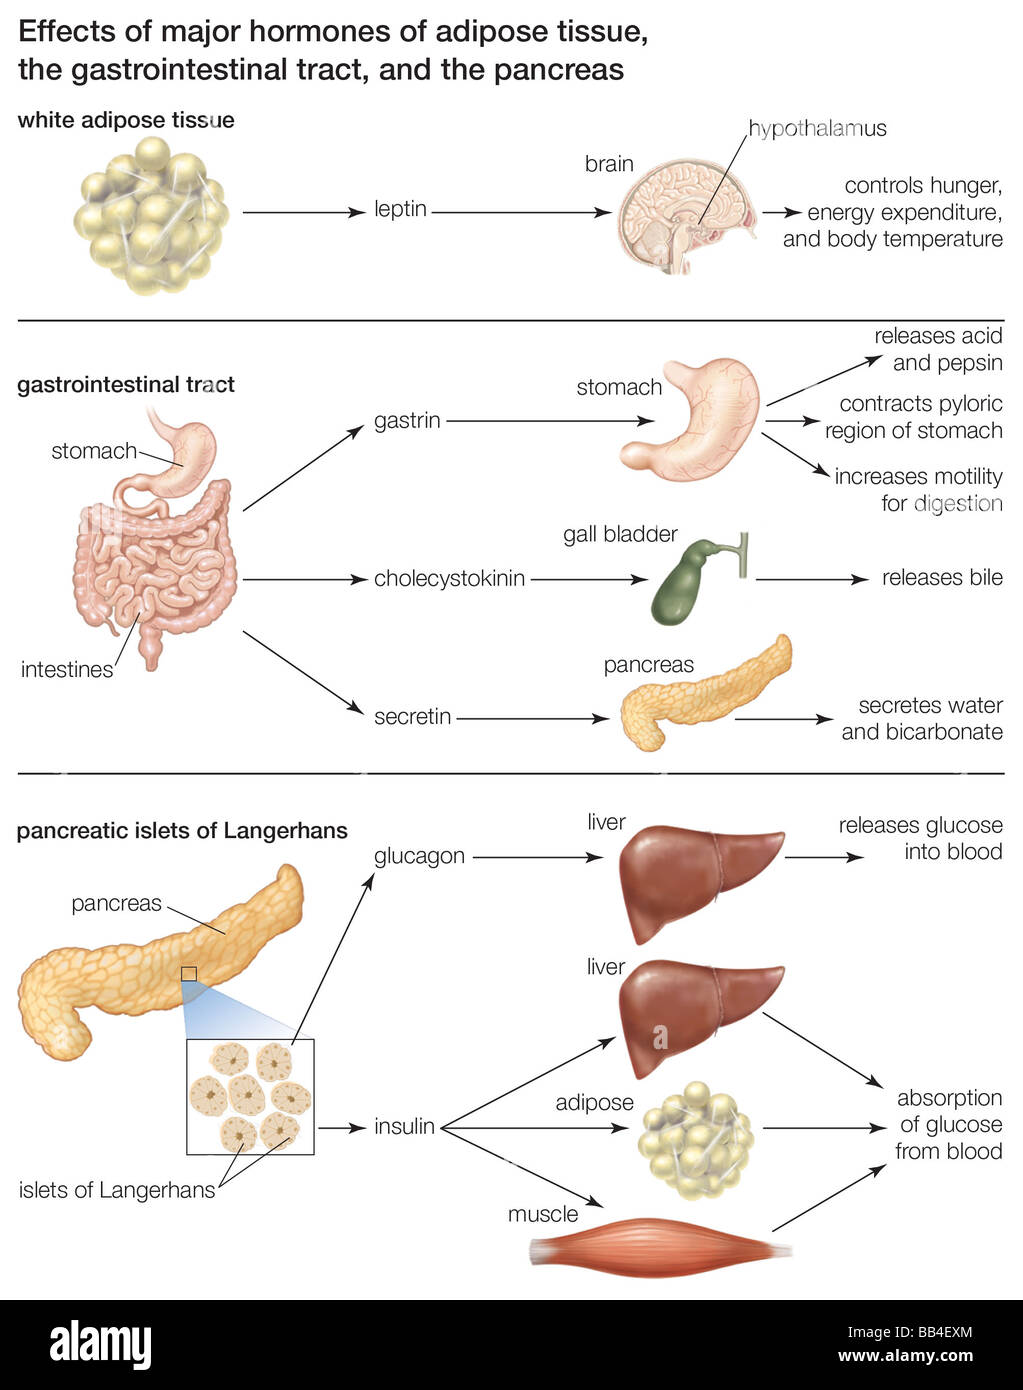 The major hormones of adipose tissue, the gastrointestinal tract, and